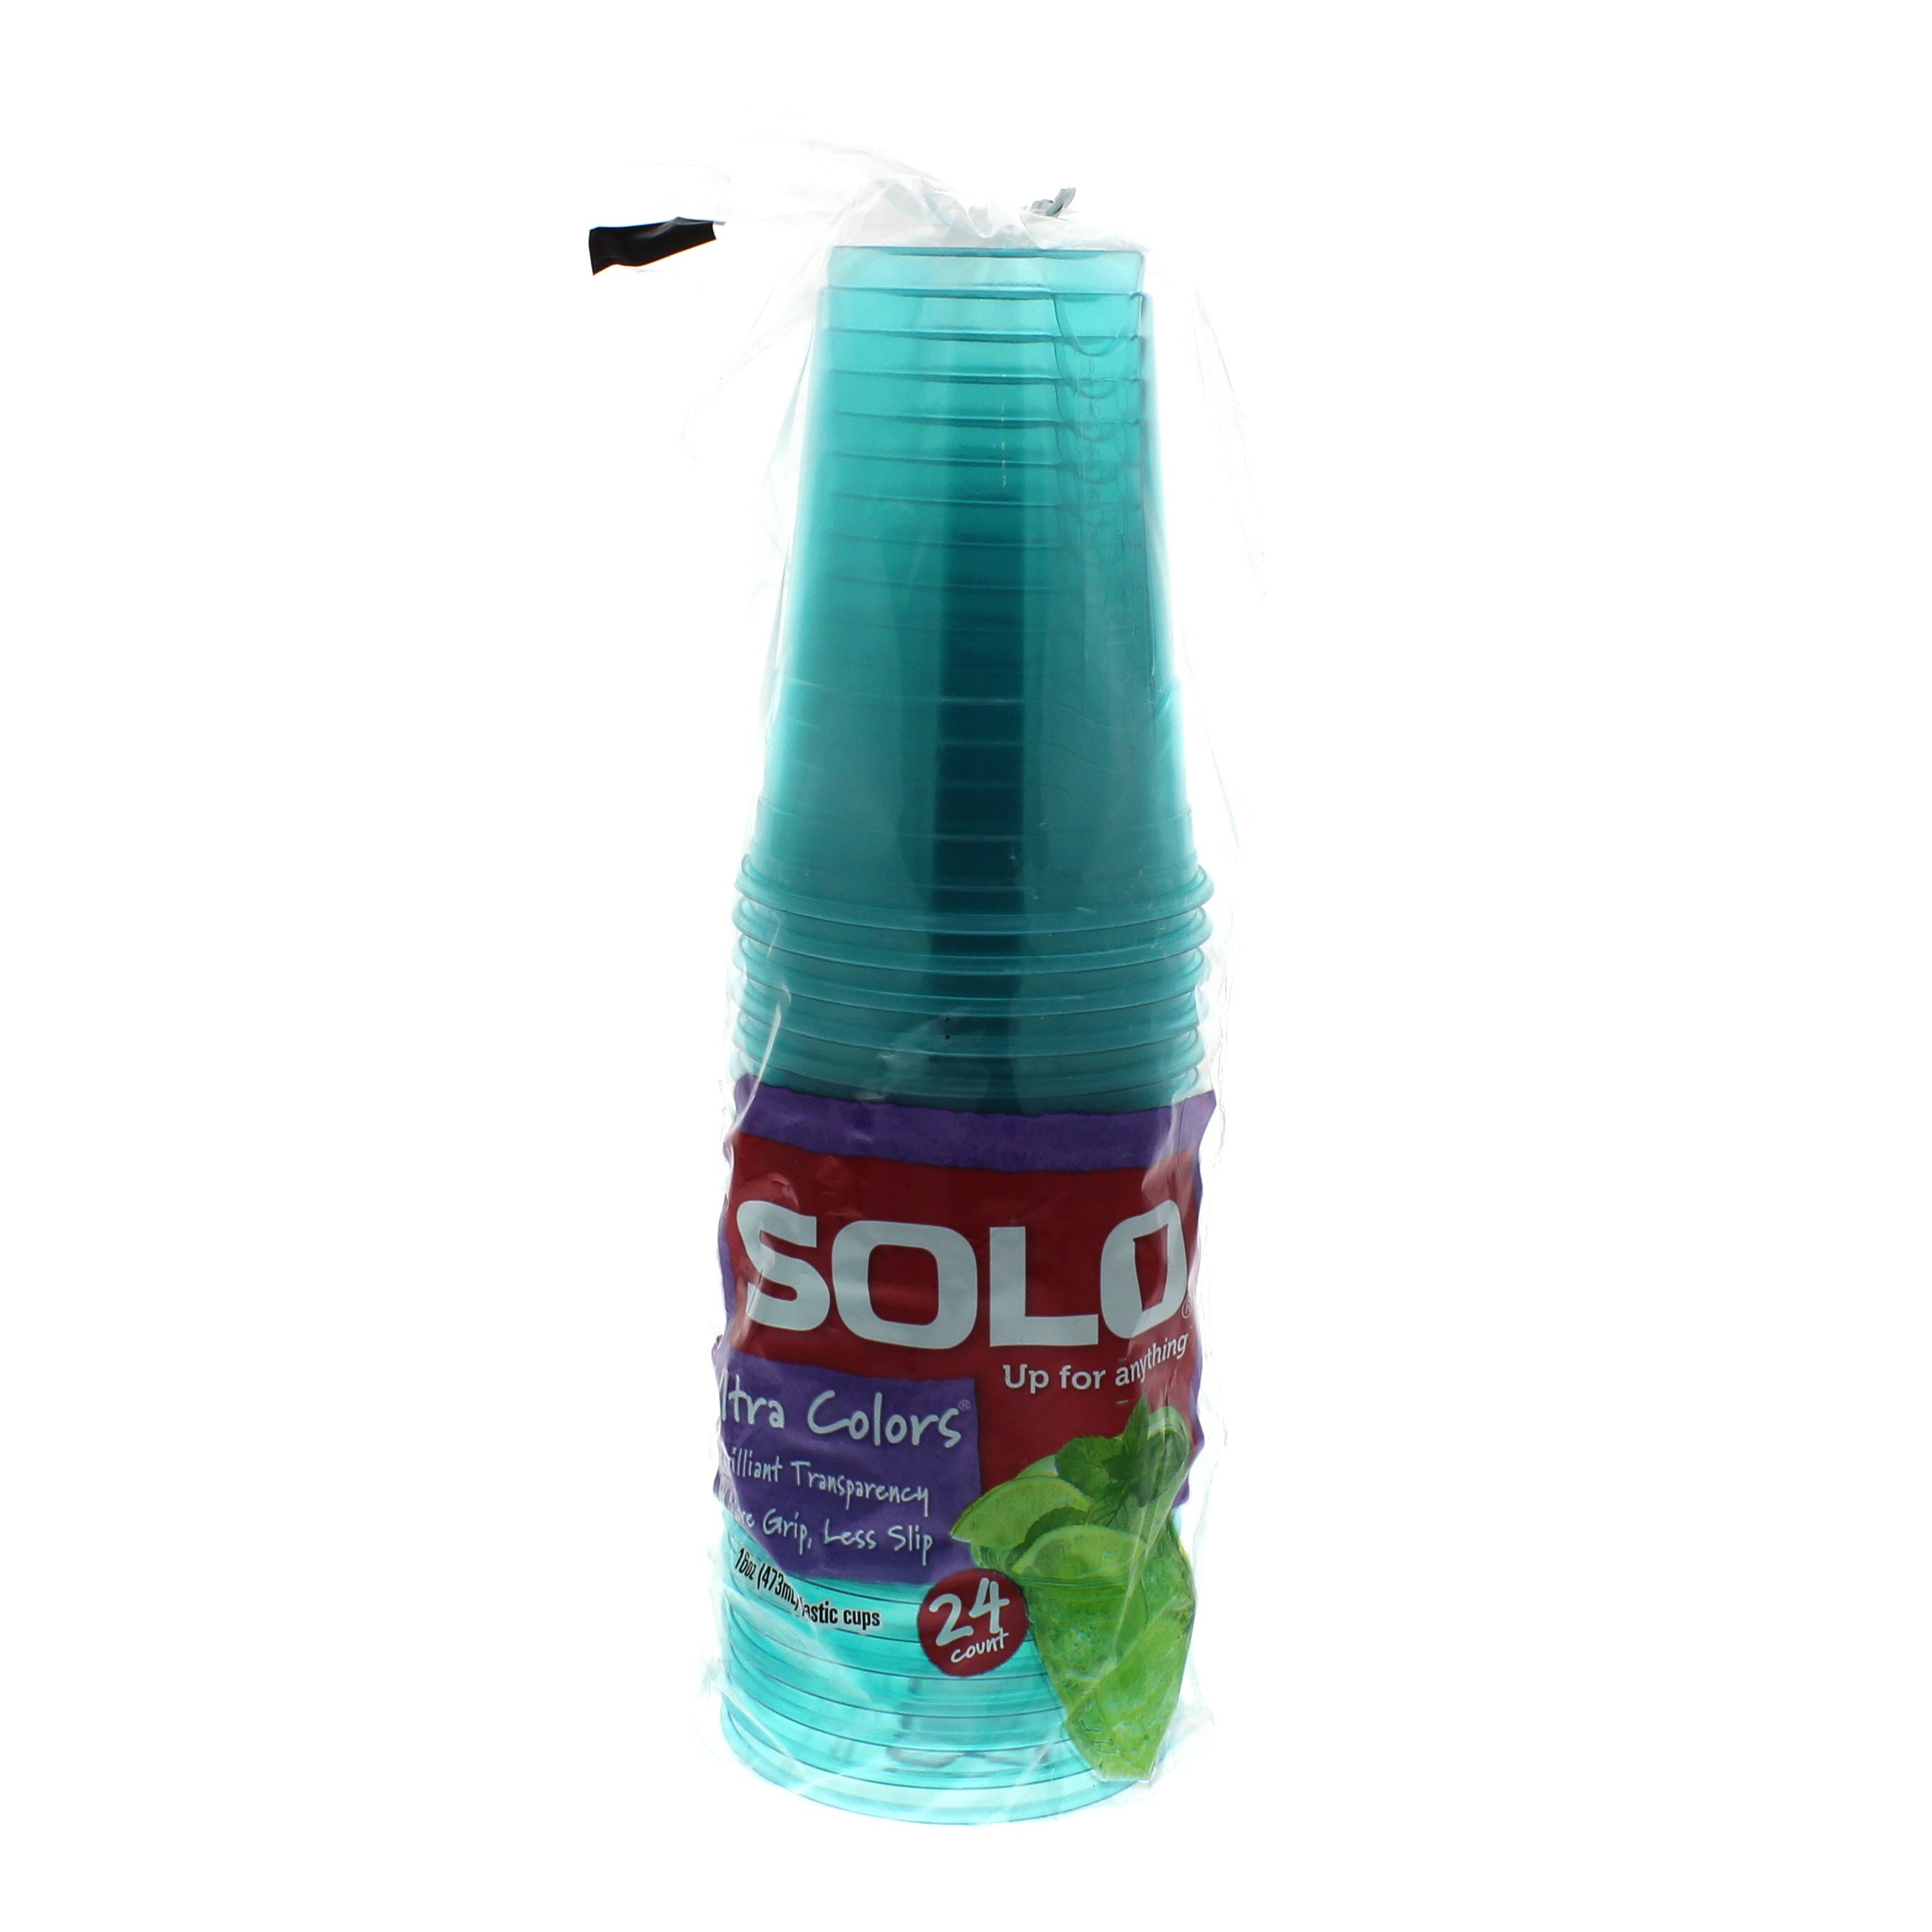 Solo 16 OZ Ultra Colors Plastic Cups - Colors May Vary